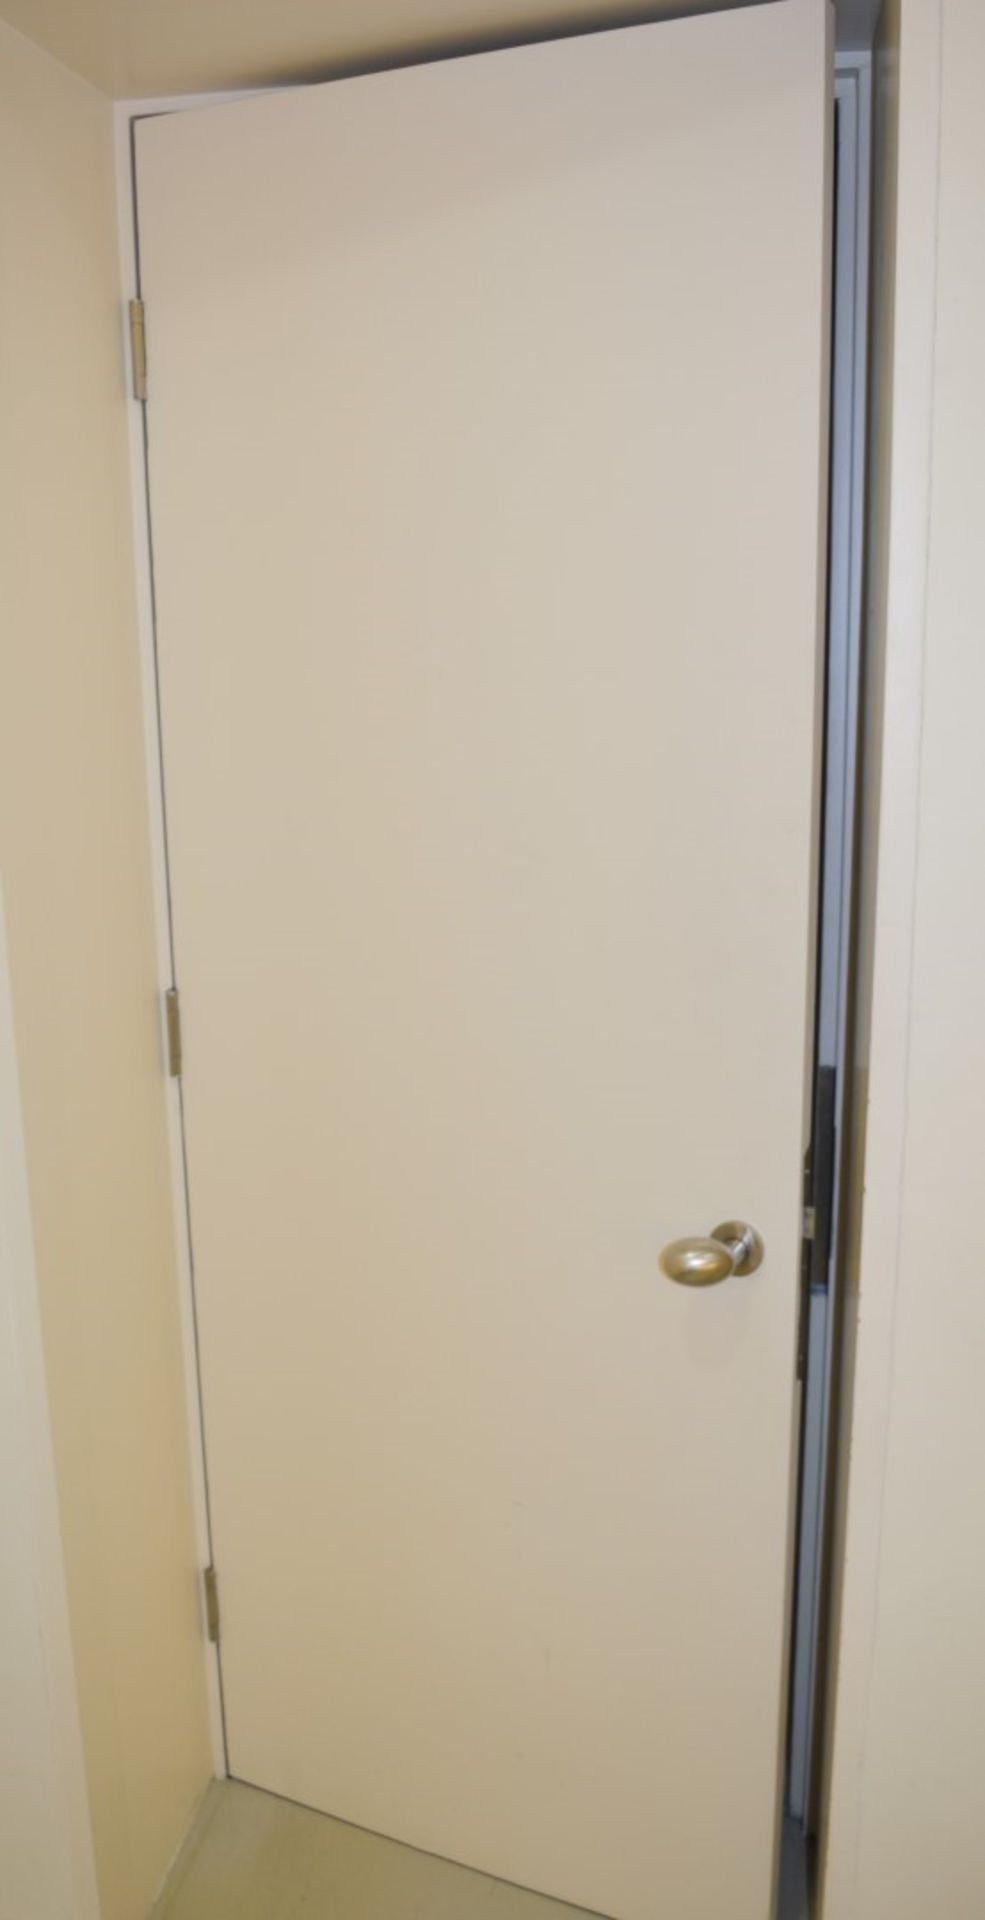 1 x Fire Resistant Internal Door - Fitted With Stylish Chrome Door Knobs and Triple Hinges - H194. - Image 3 of 4